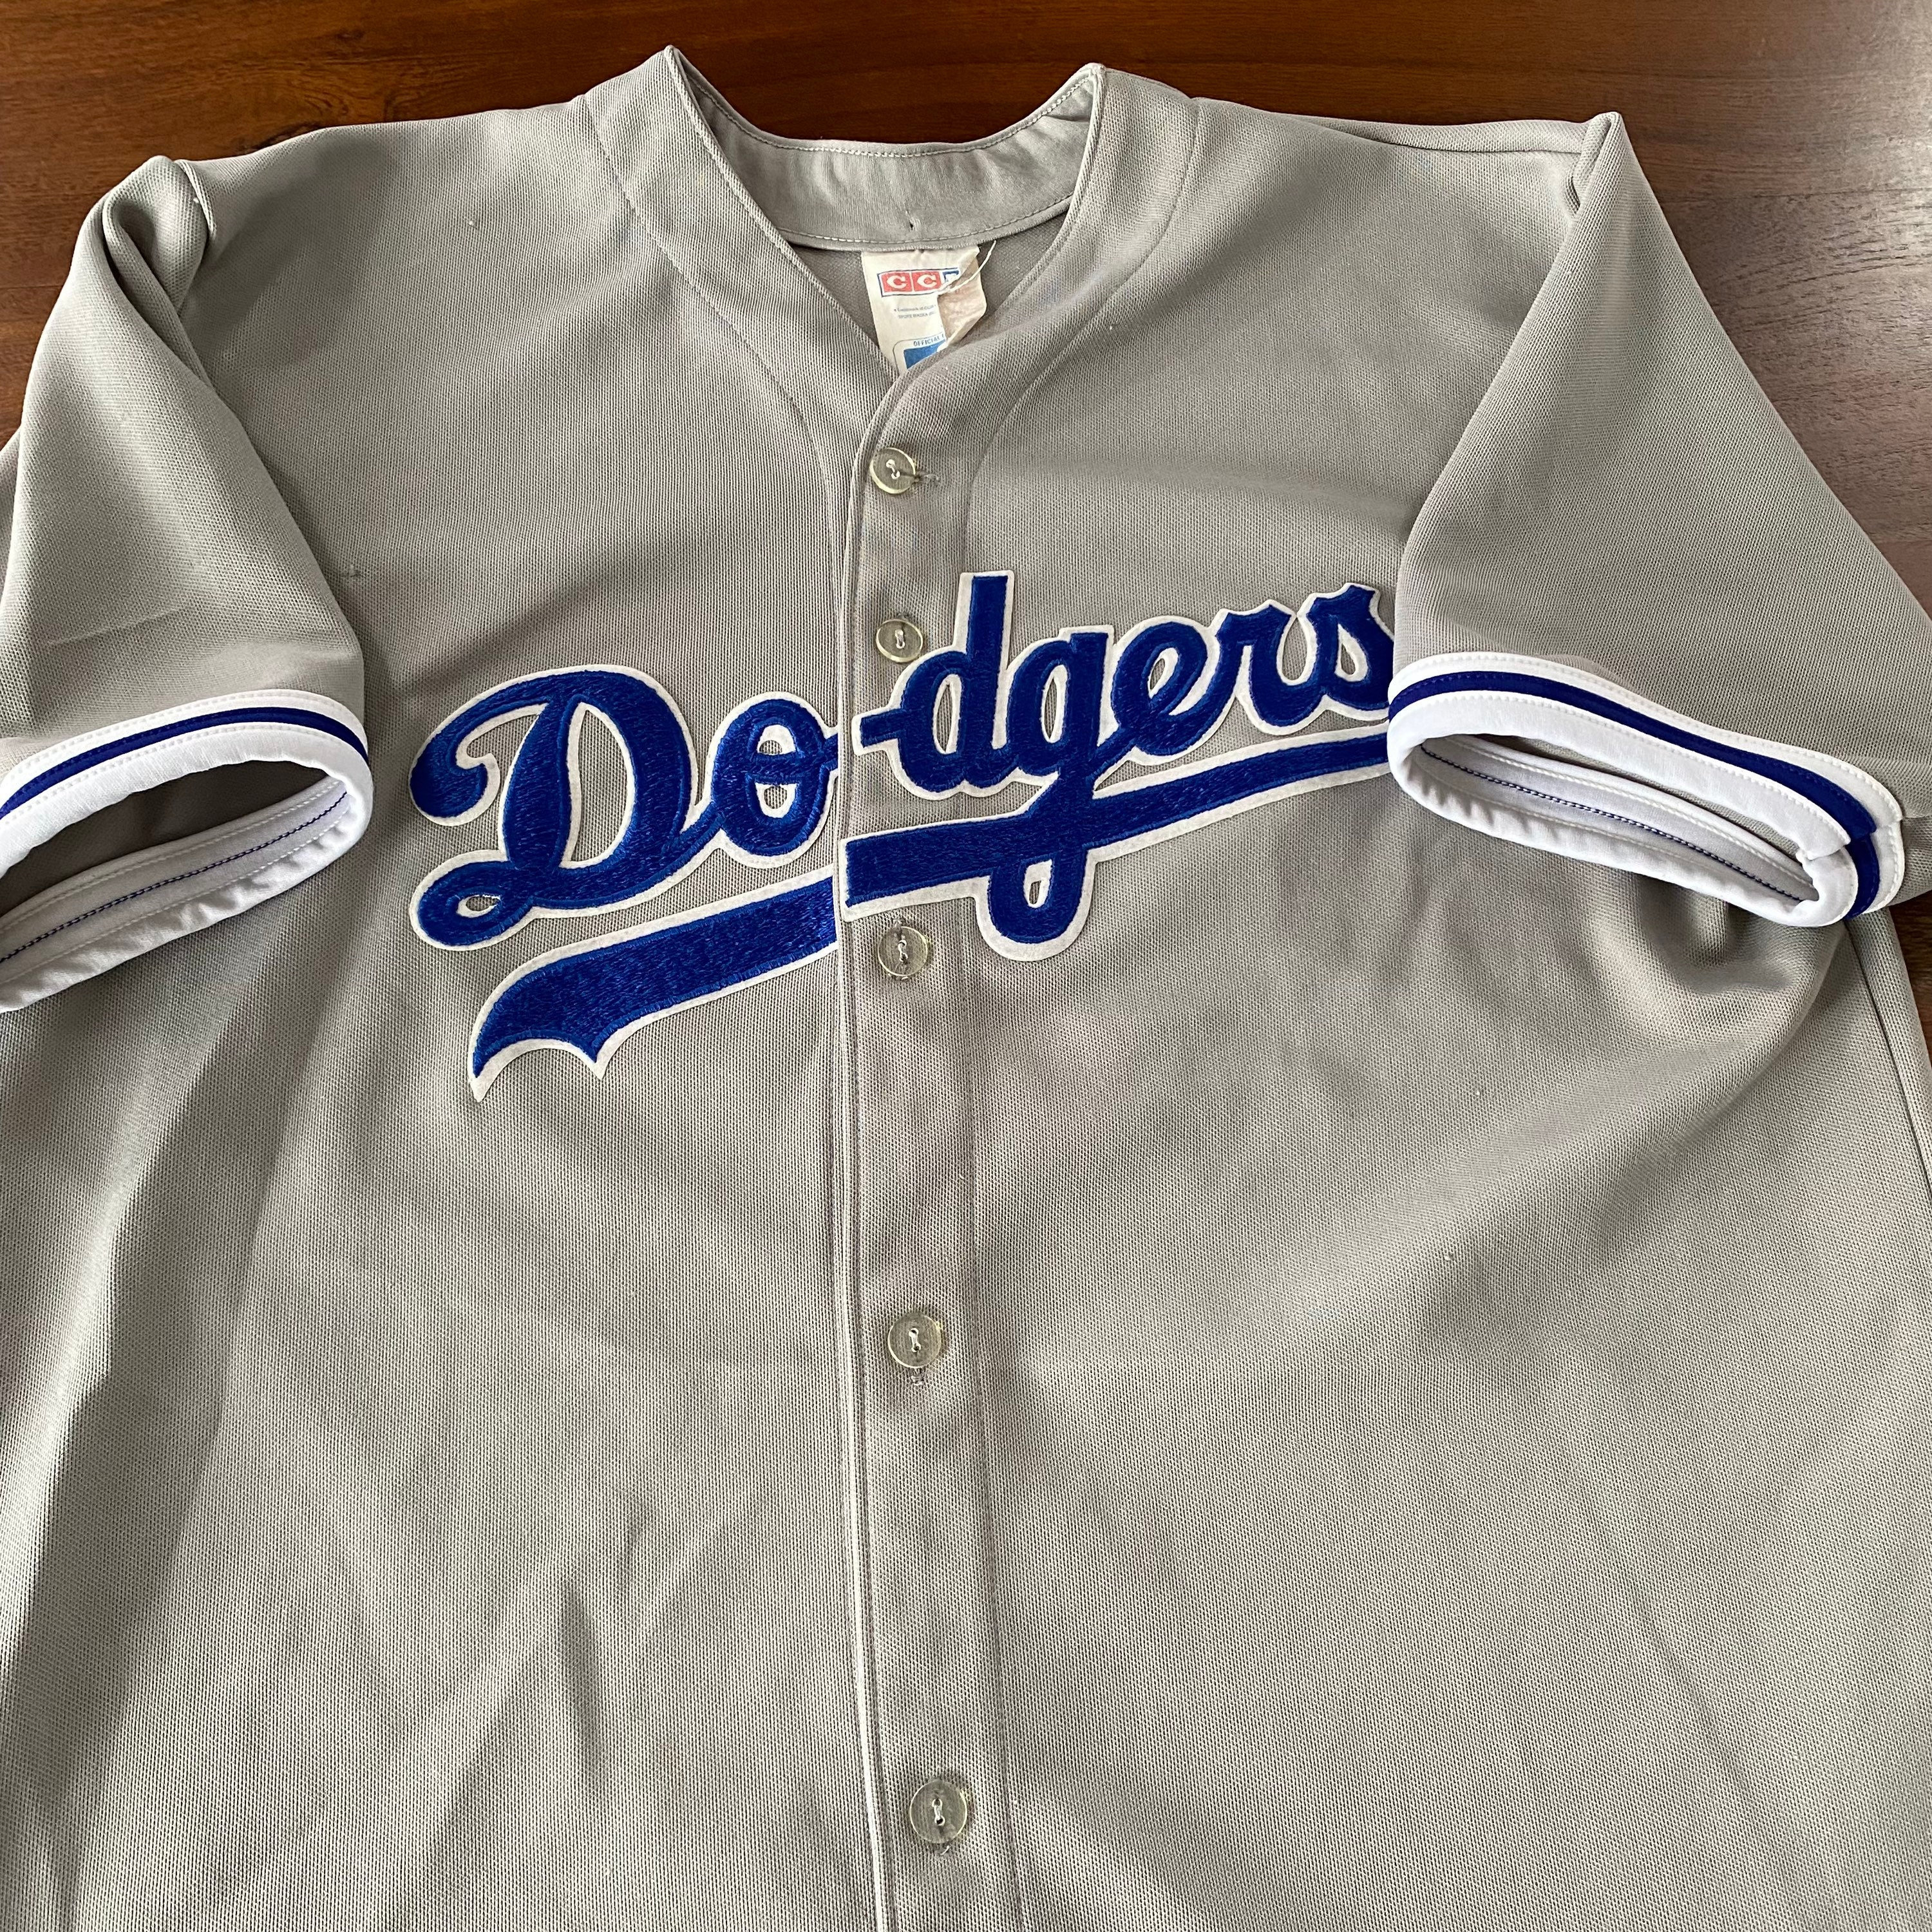 julio urias city connect jersey giveaway